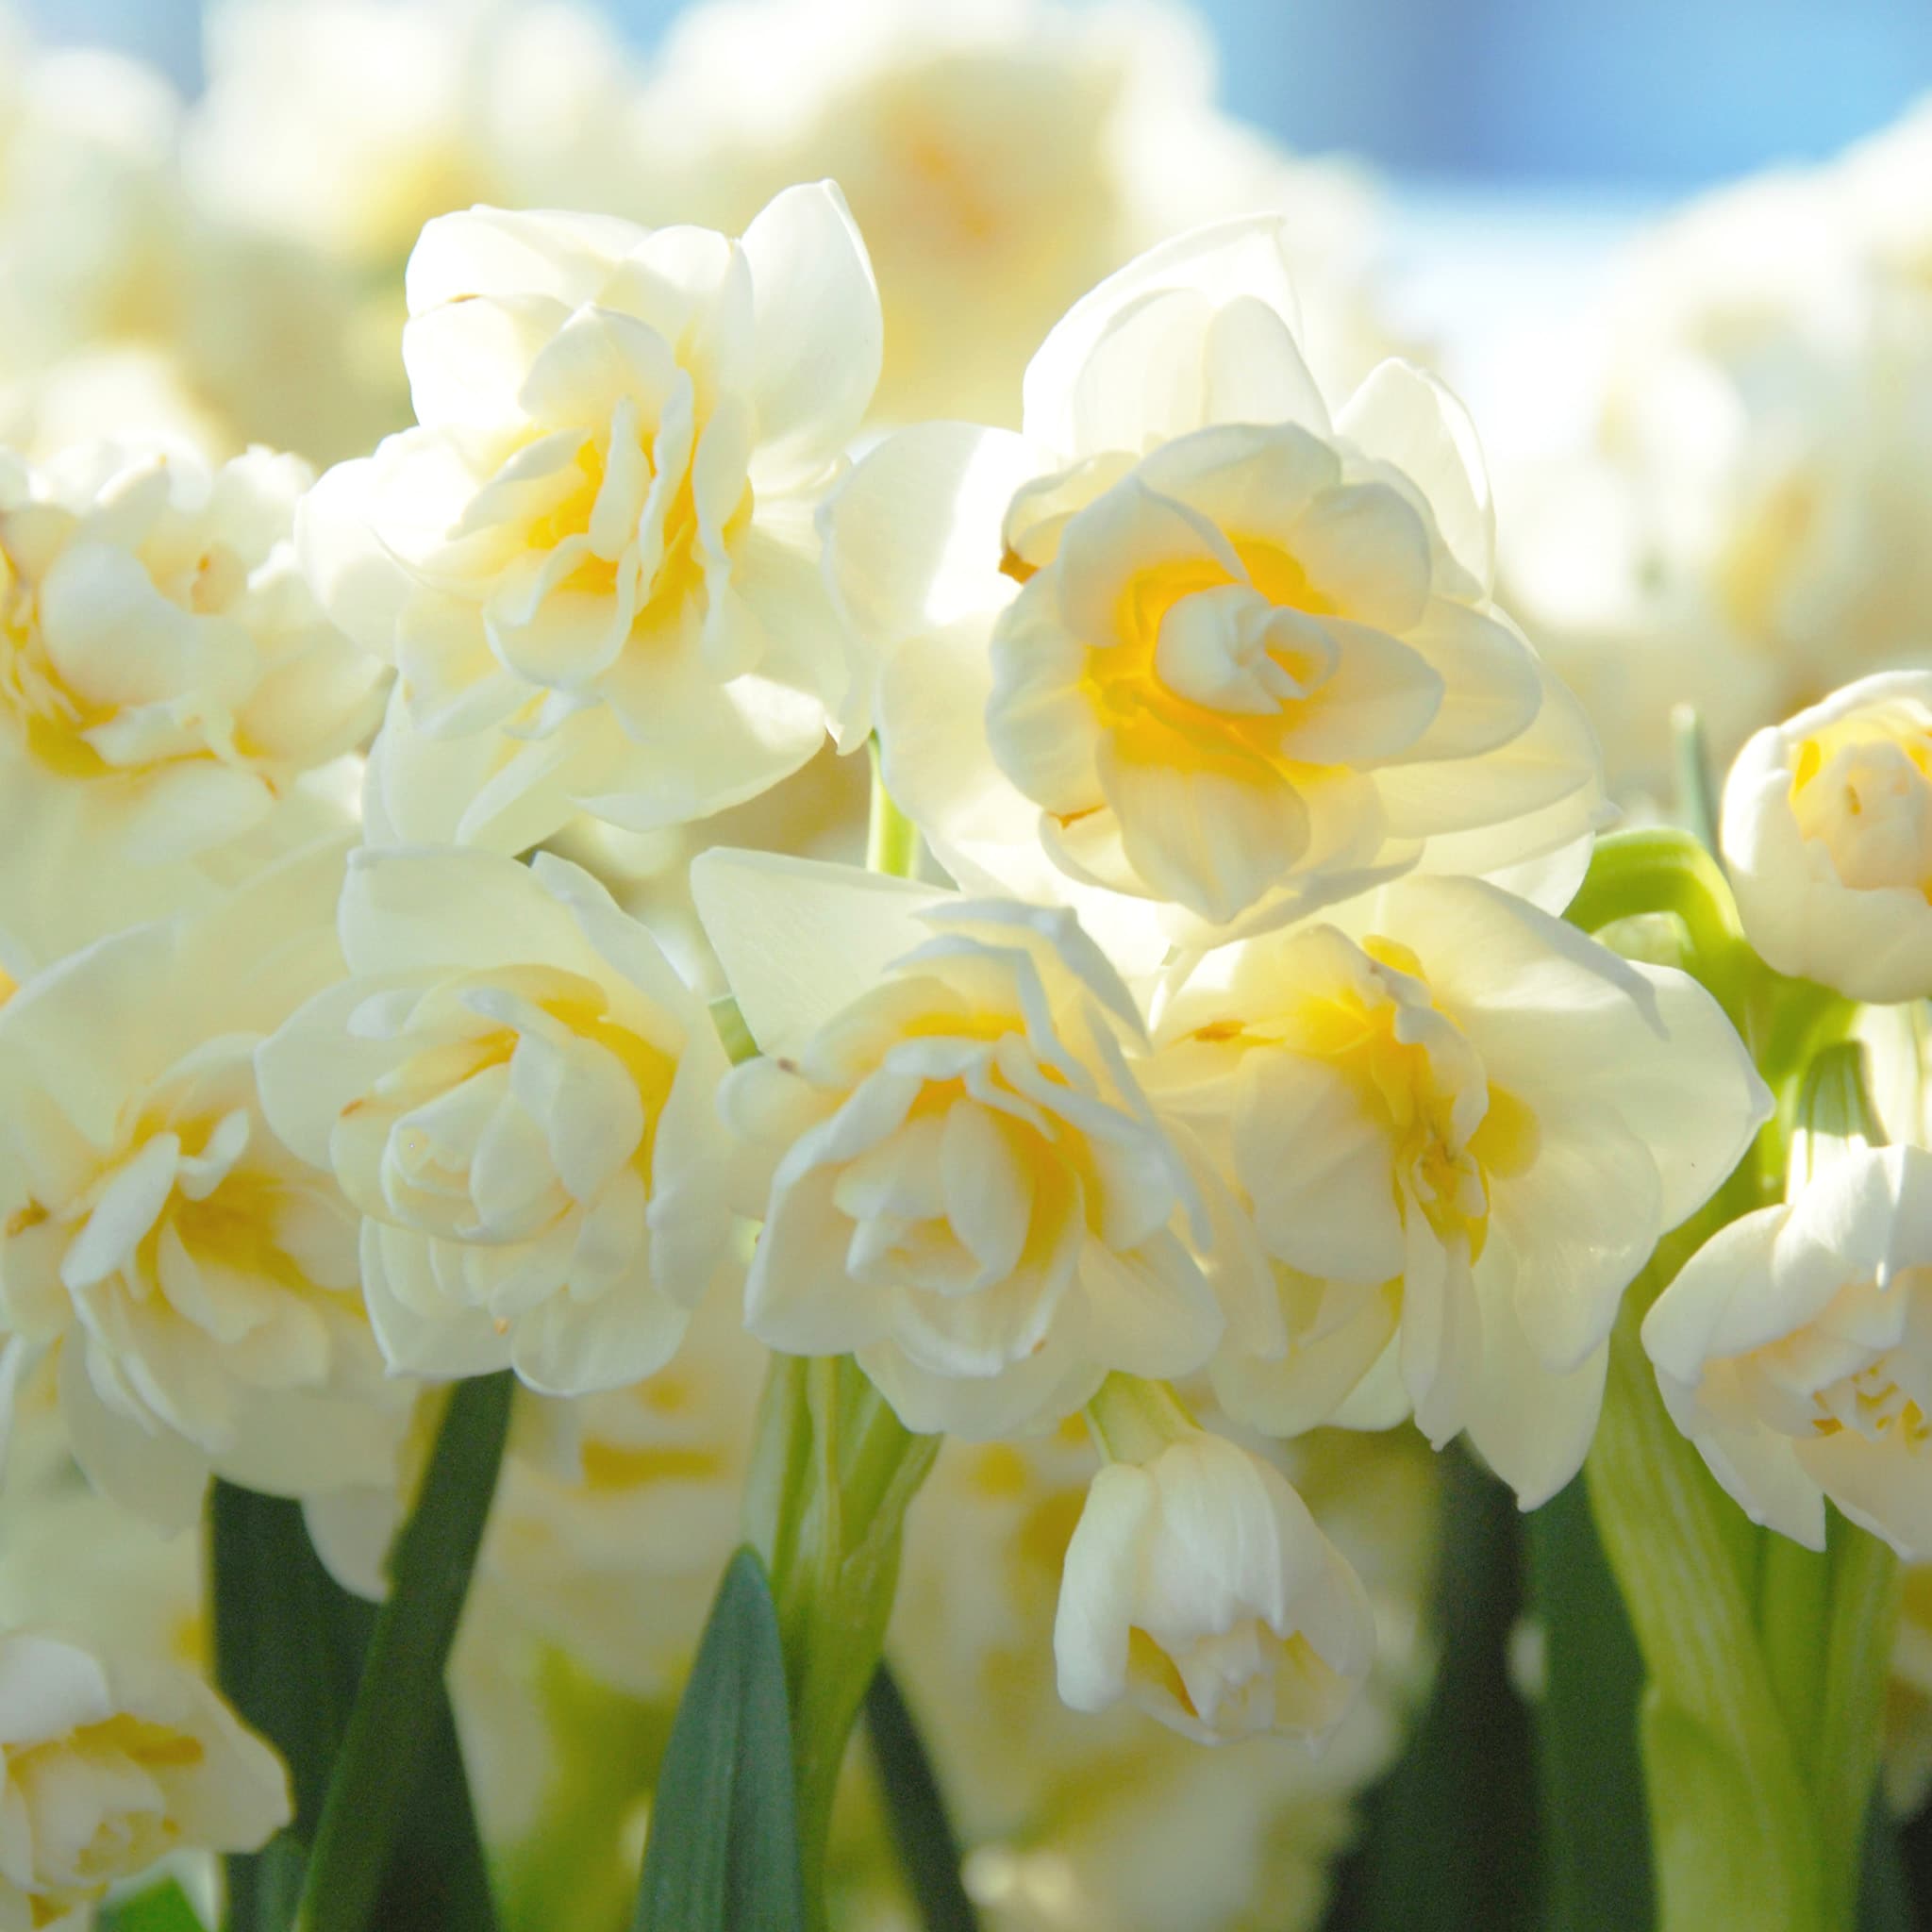 Daffodil Bulbs | Item # 3808 Erlicheer | For Sale - Colorblends®